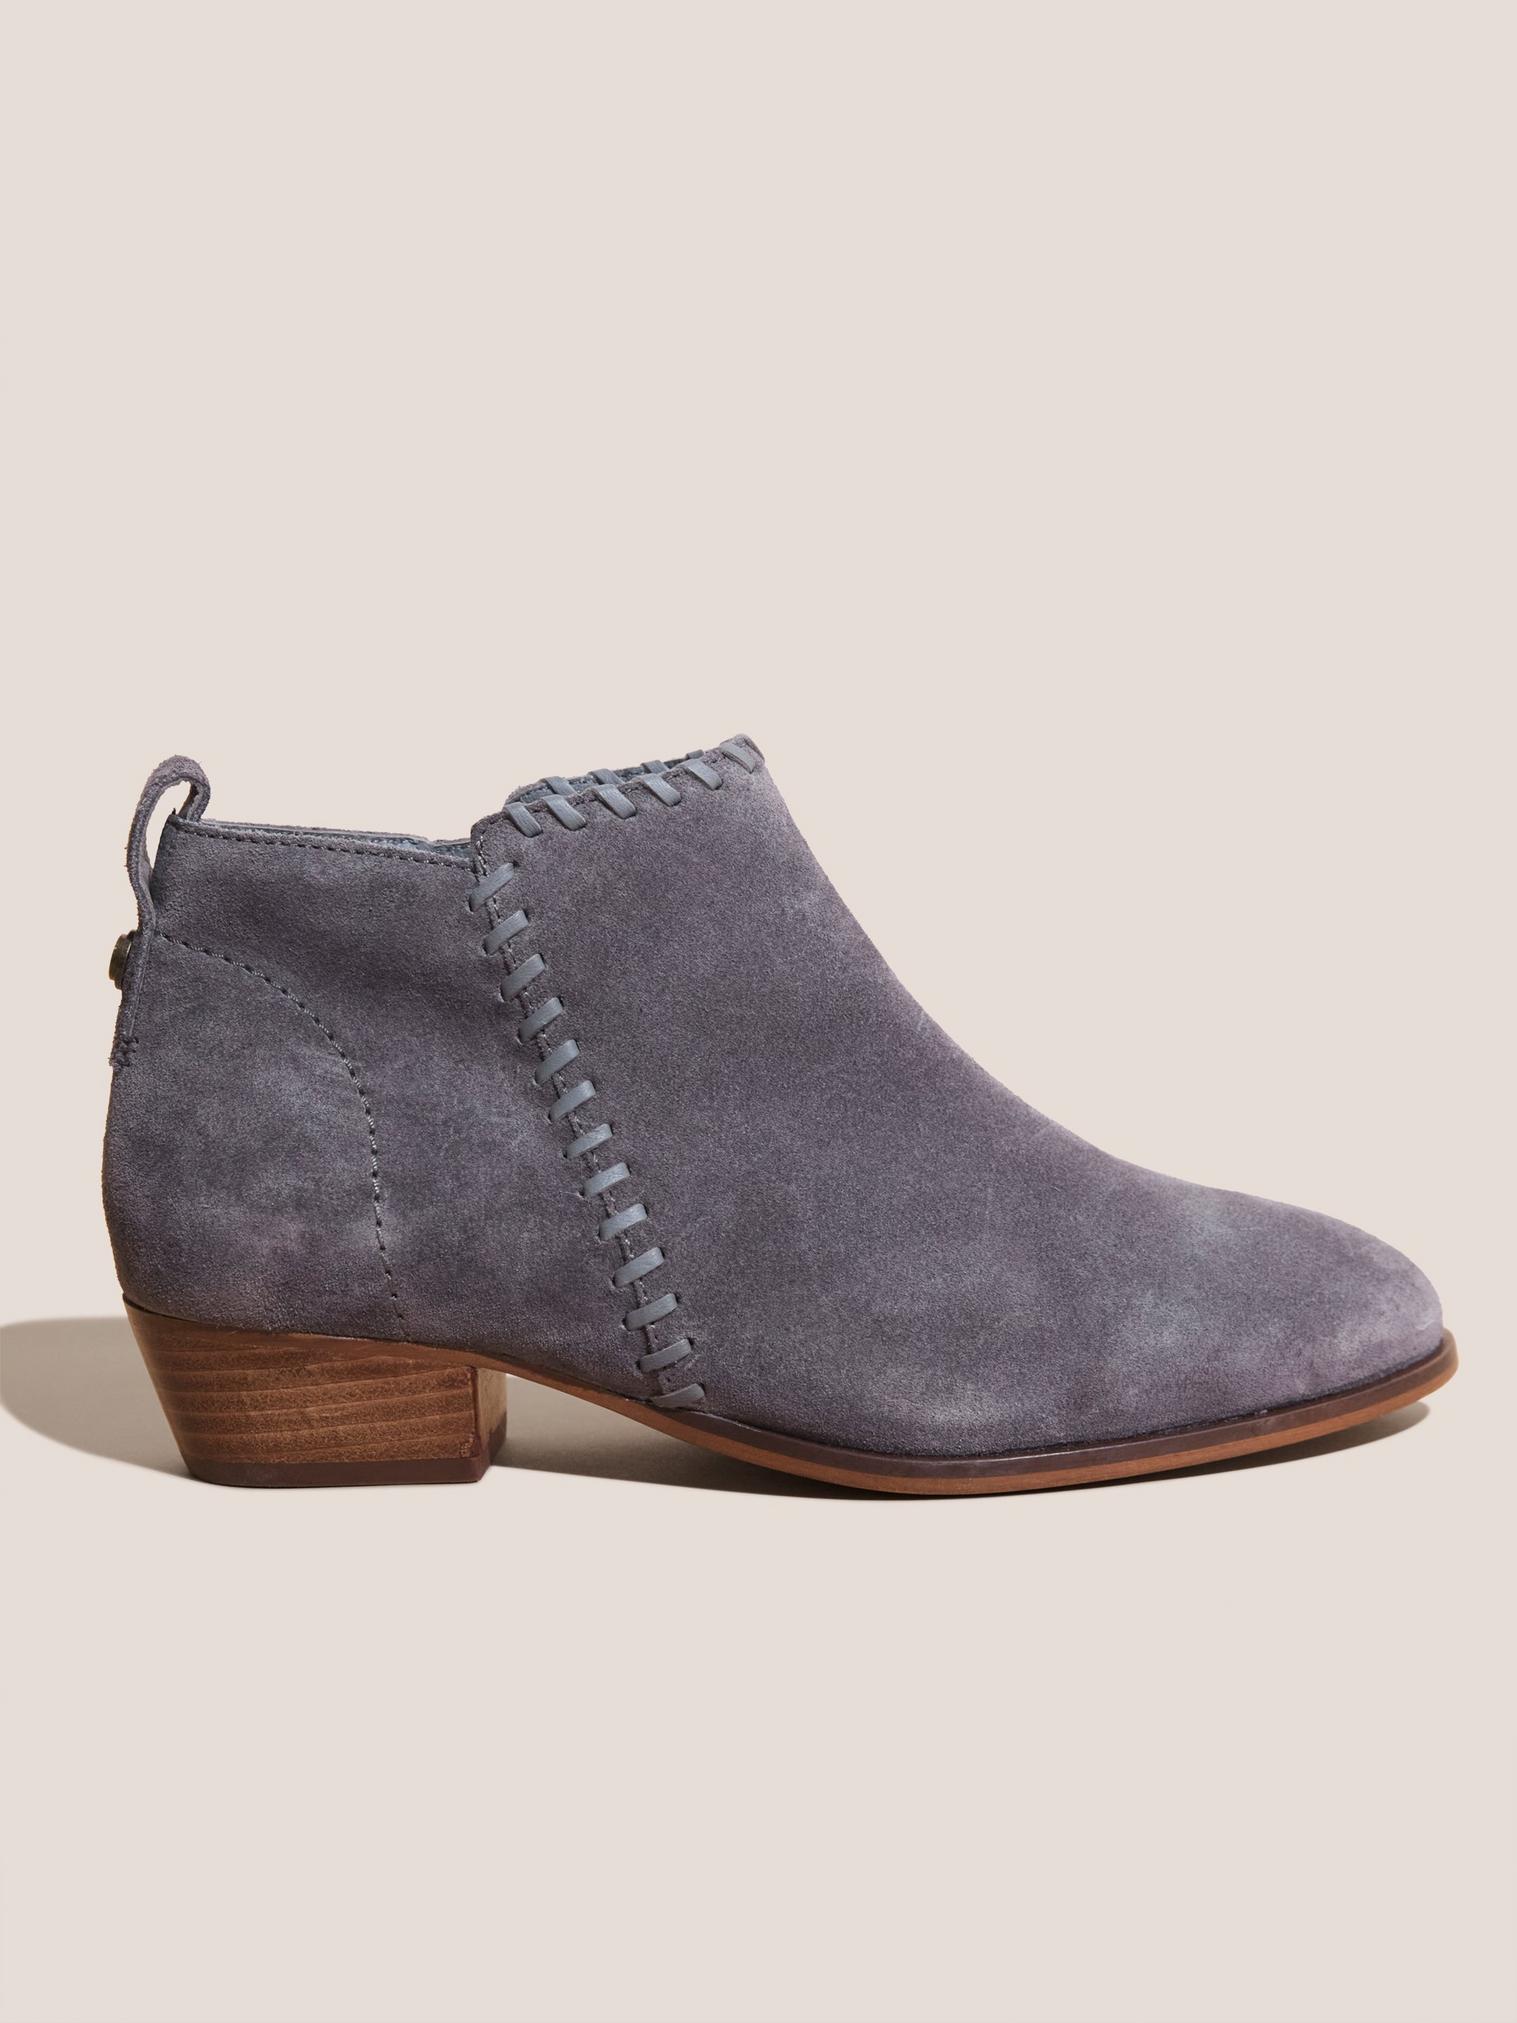 Willow Suede Ankle Boot in DK GREY - MODEL FRONT